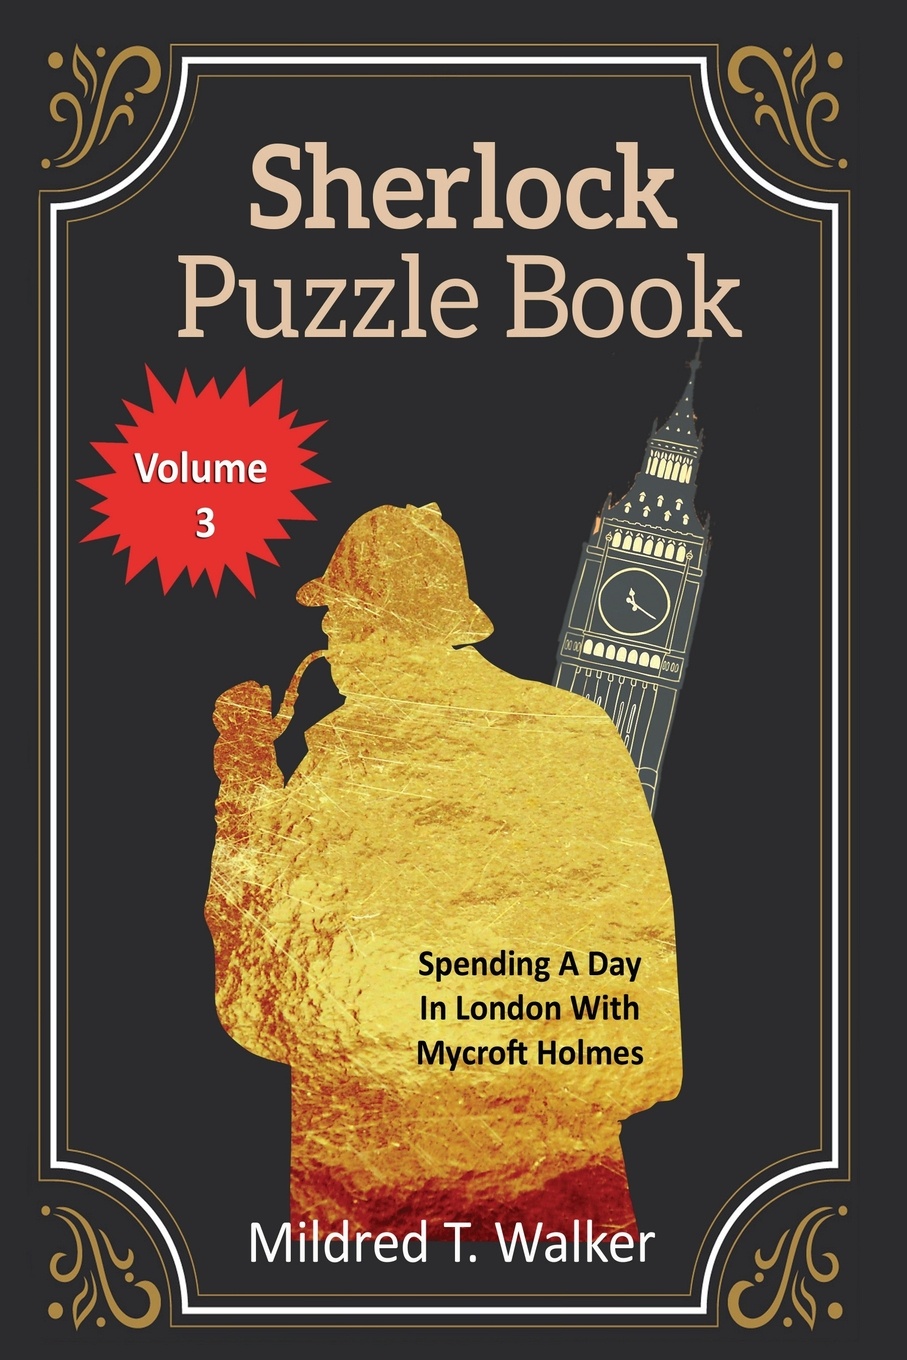 Sherlock Puzzle Book (Volume 3). Spending A Day In London With Mycroft Holmes